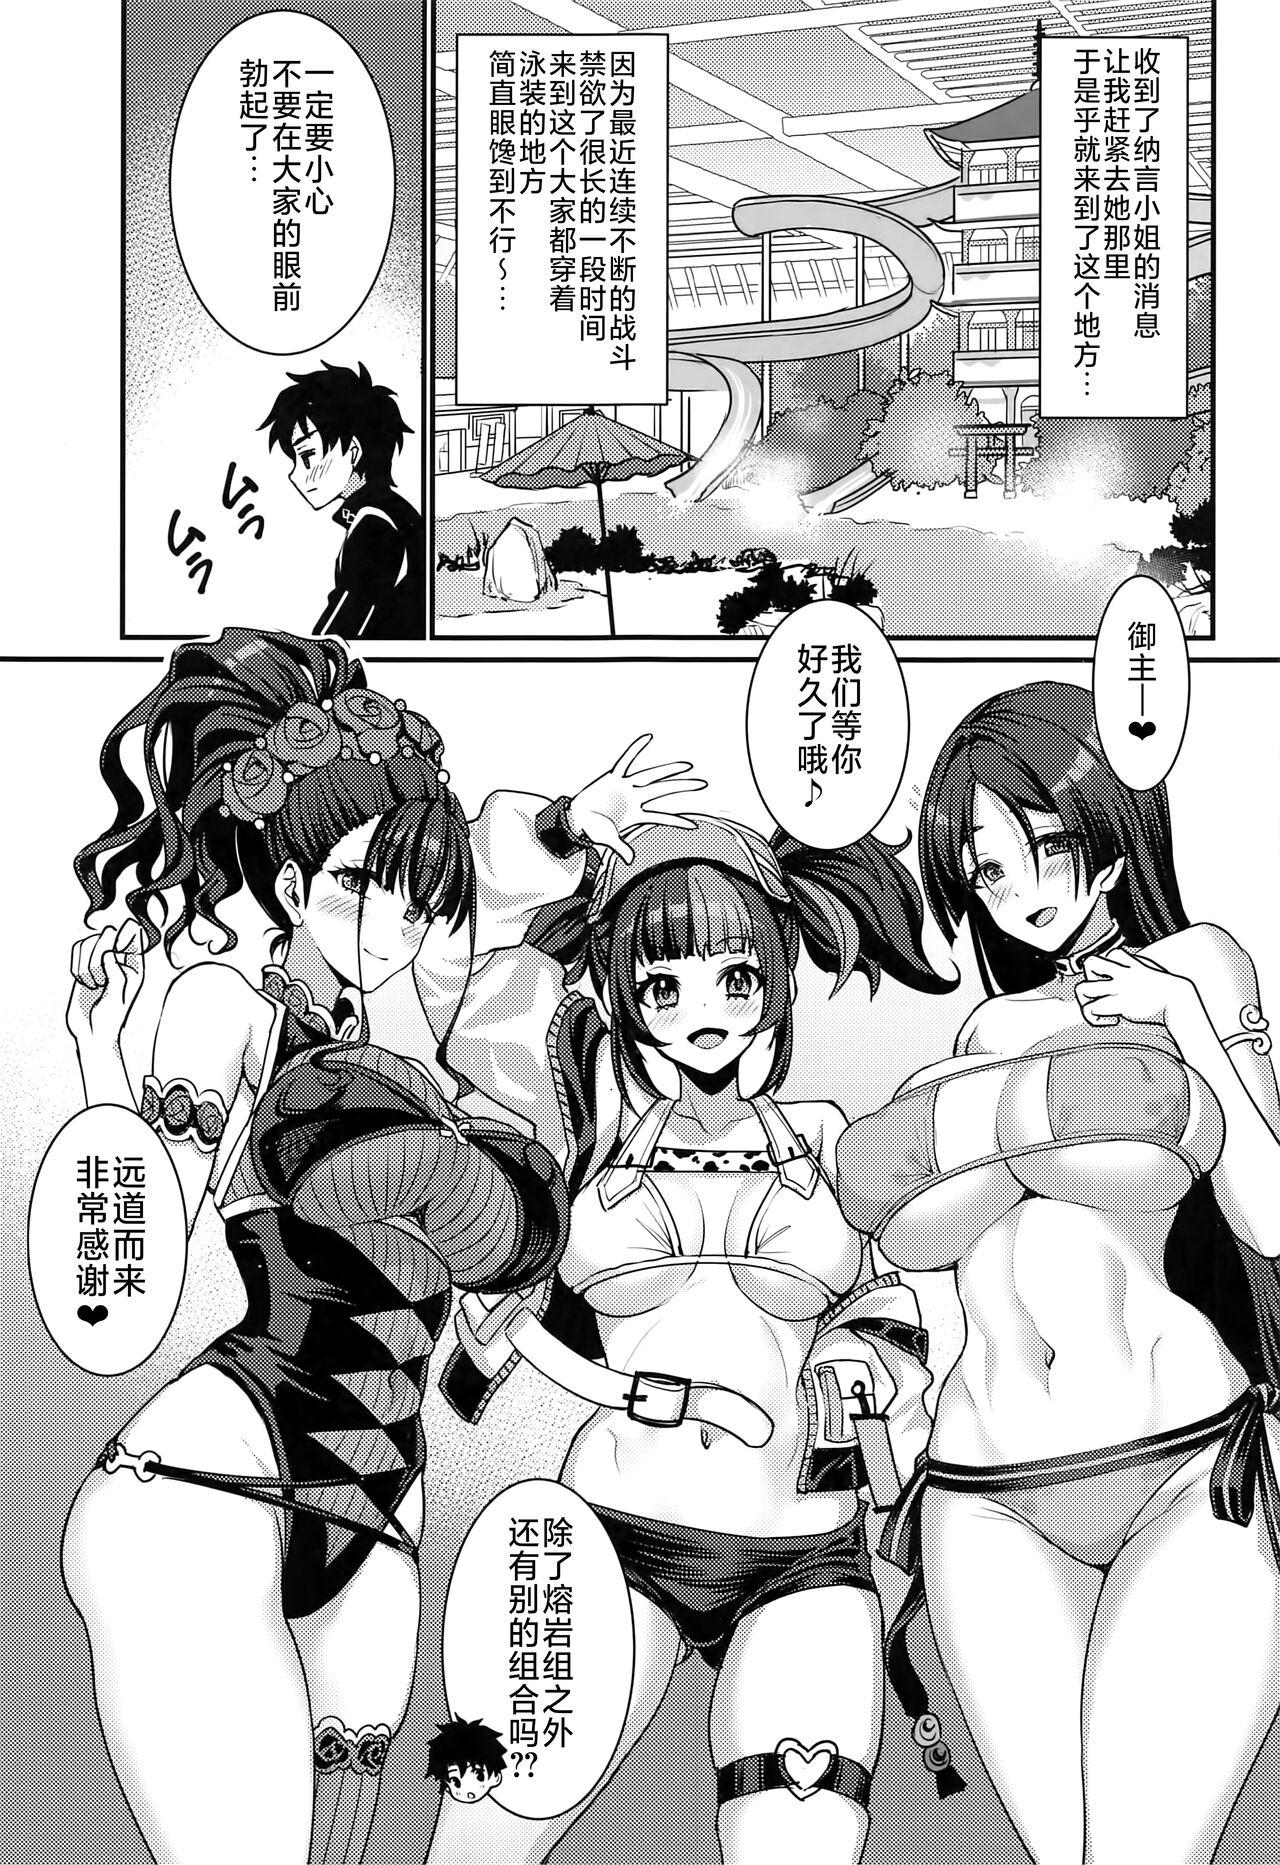 Khmer 平安女子と4P風俗プレイ - Fate grand order Amatur Porn - Page 2